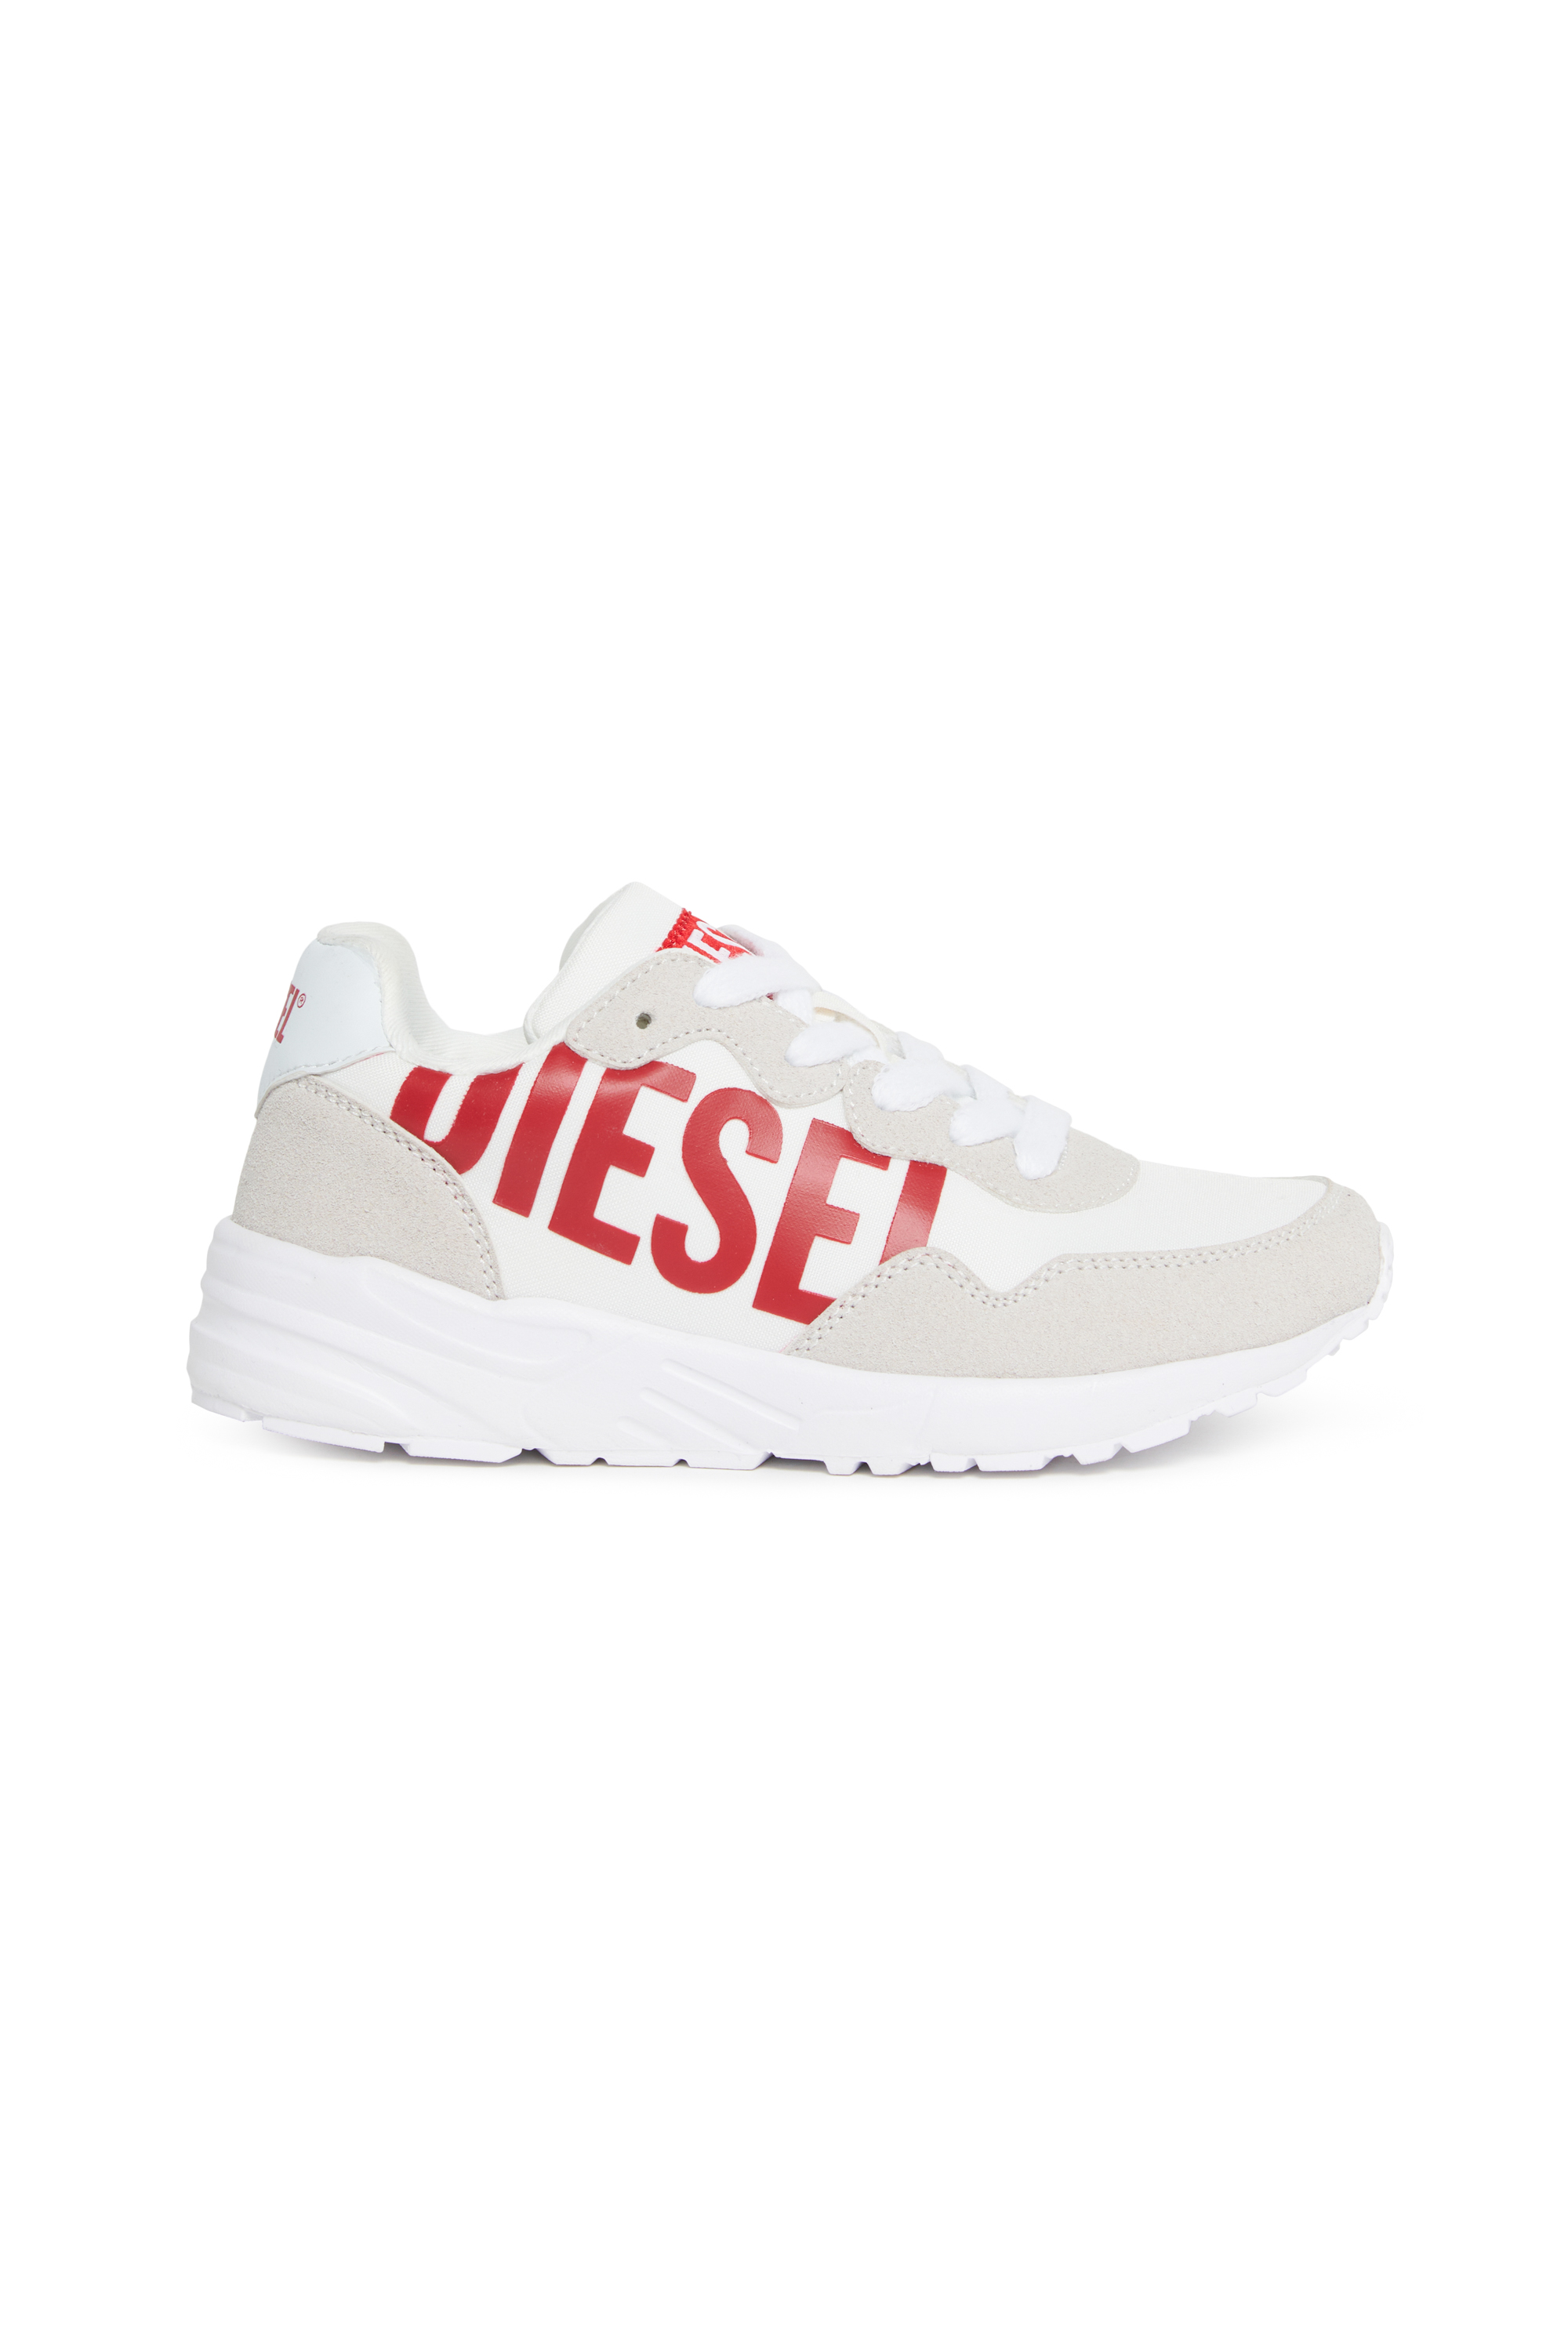 Diesel - S-STAR LIGHT LC, Weiss/Rot - Image 1